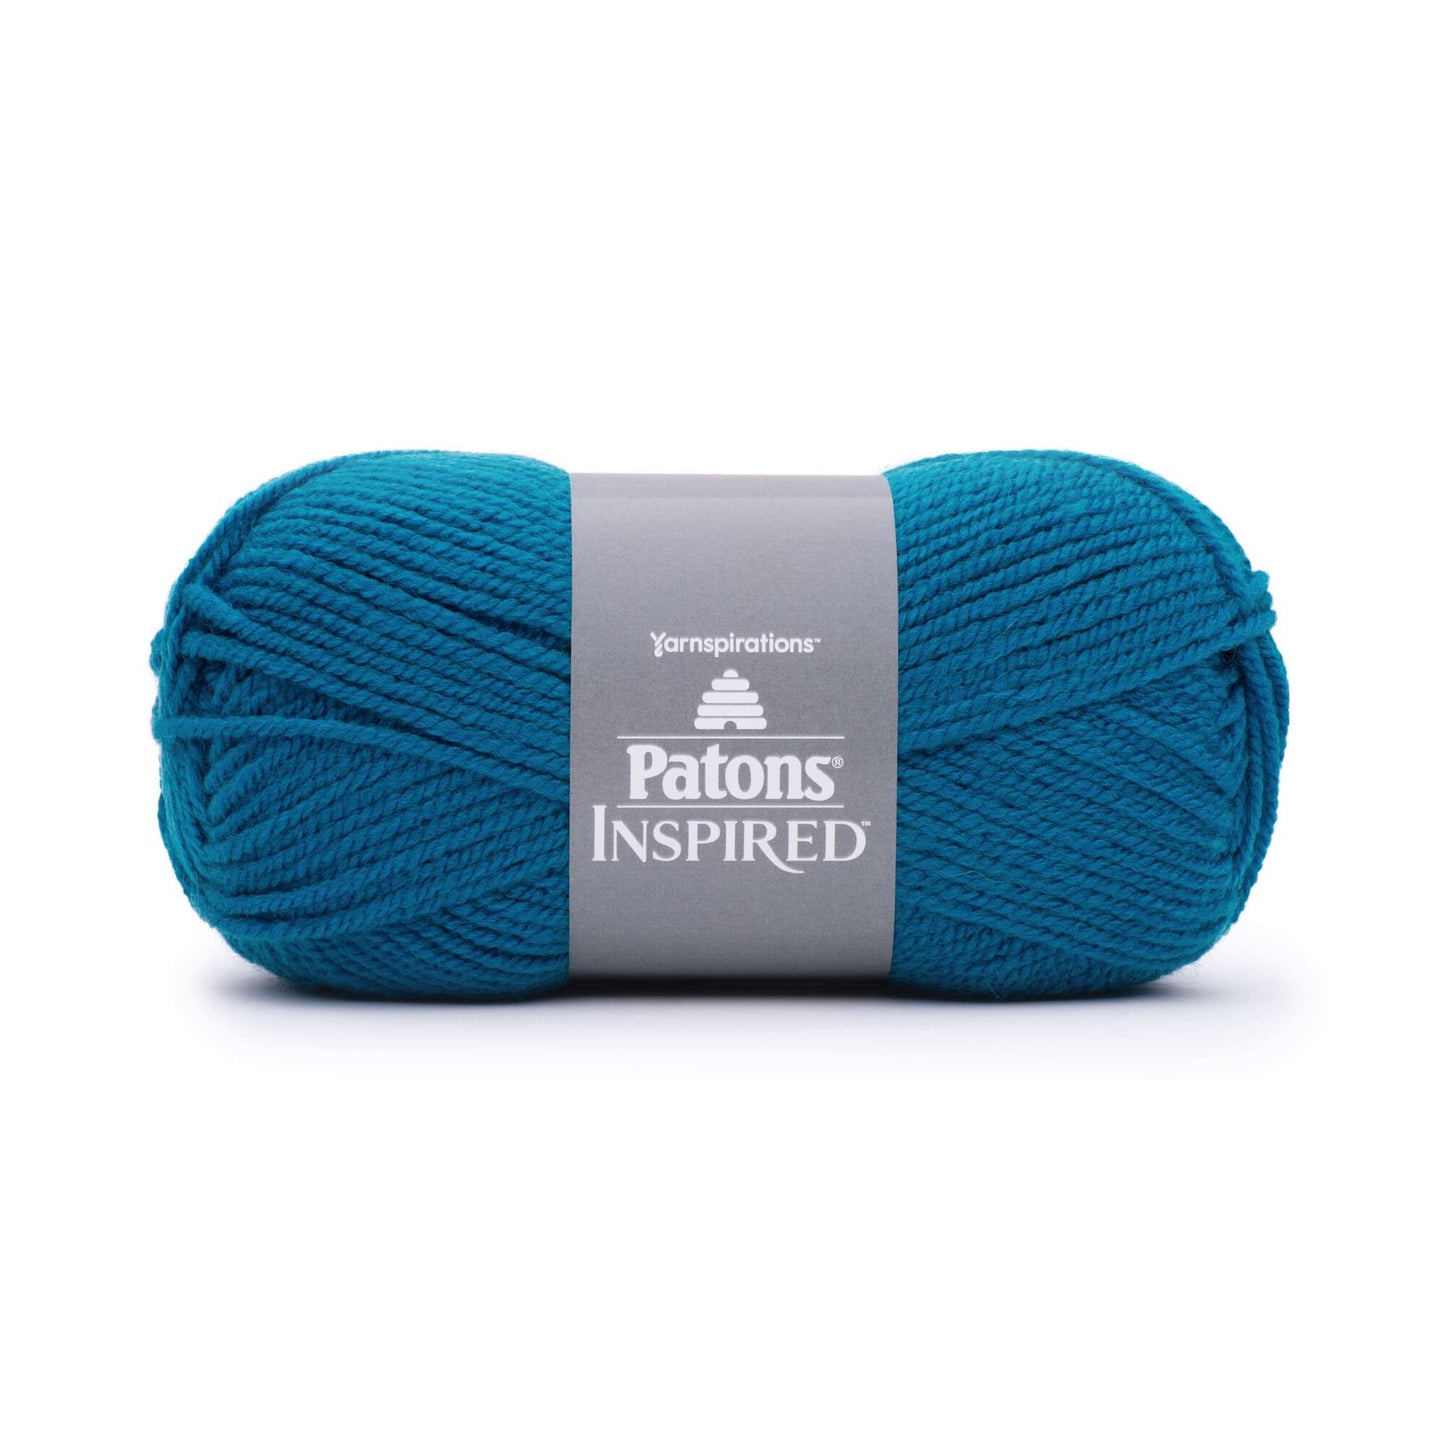 Patons® Inspired™ - 150g - 75 % acrylique, 25 % laine